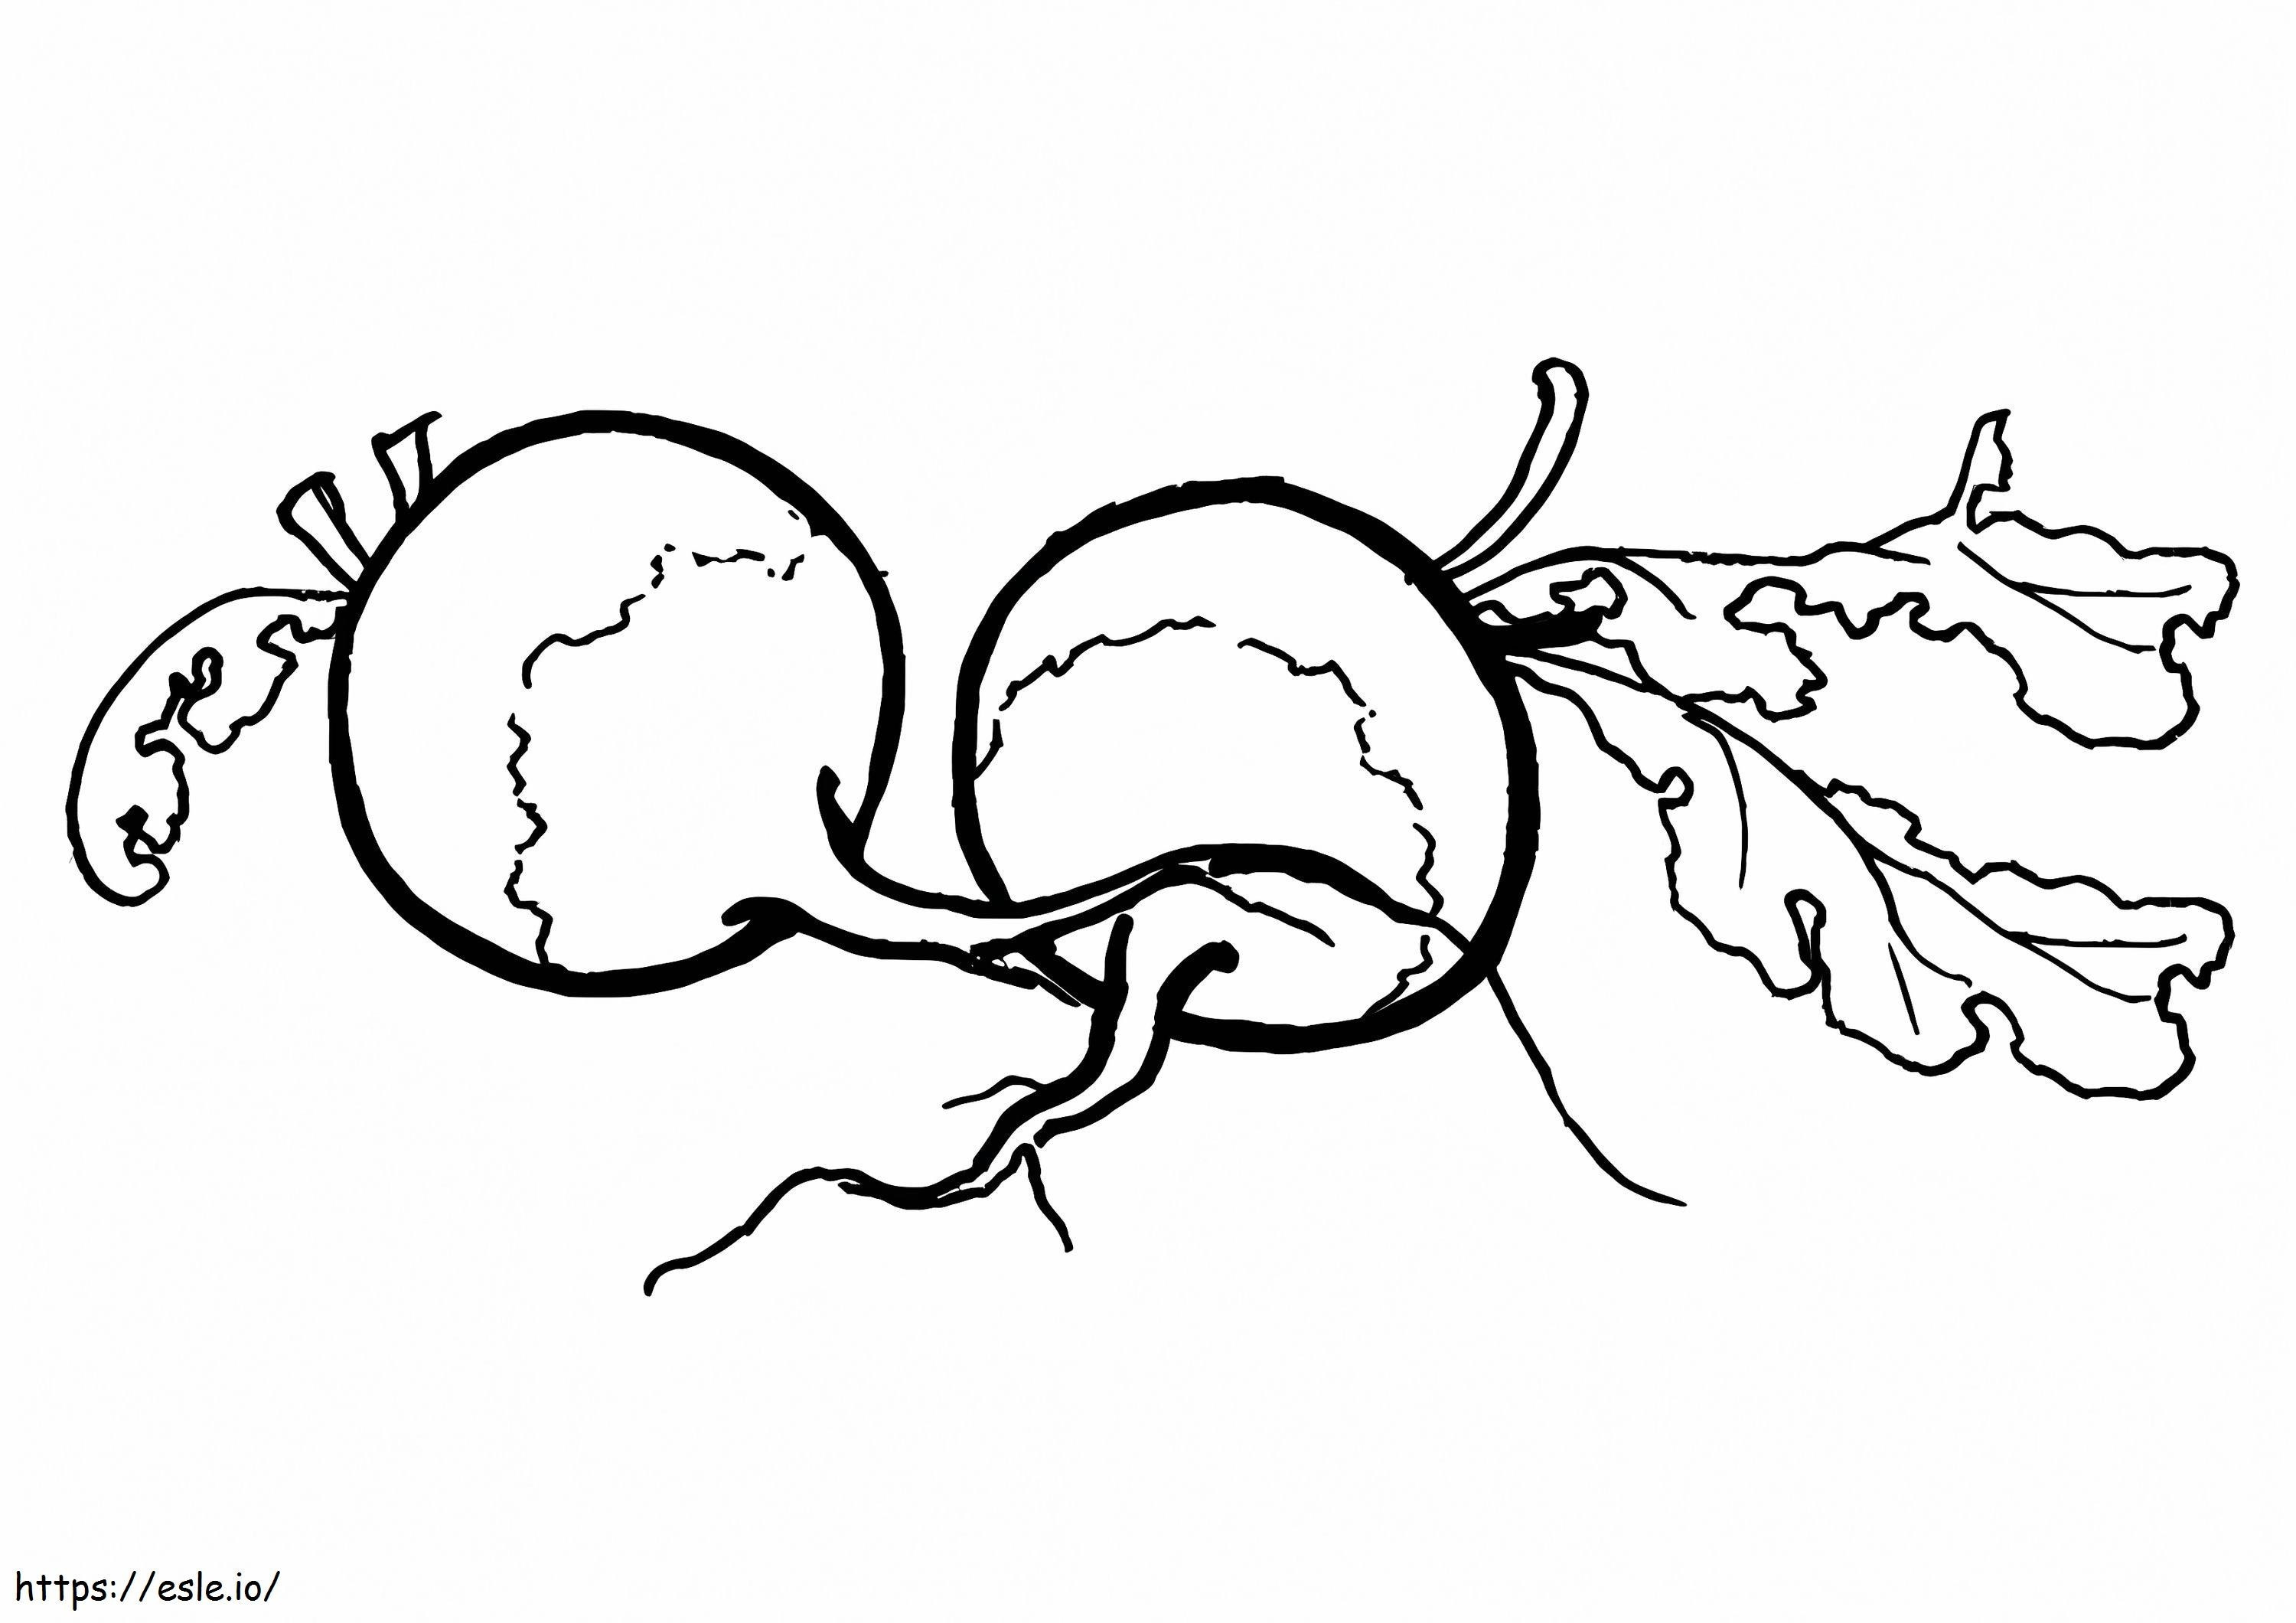 Two Simple Radish coloring page